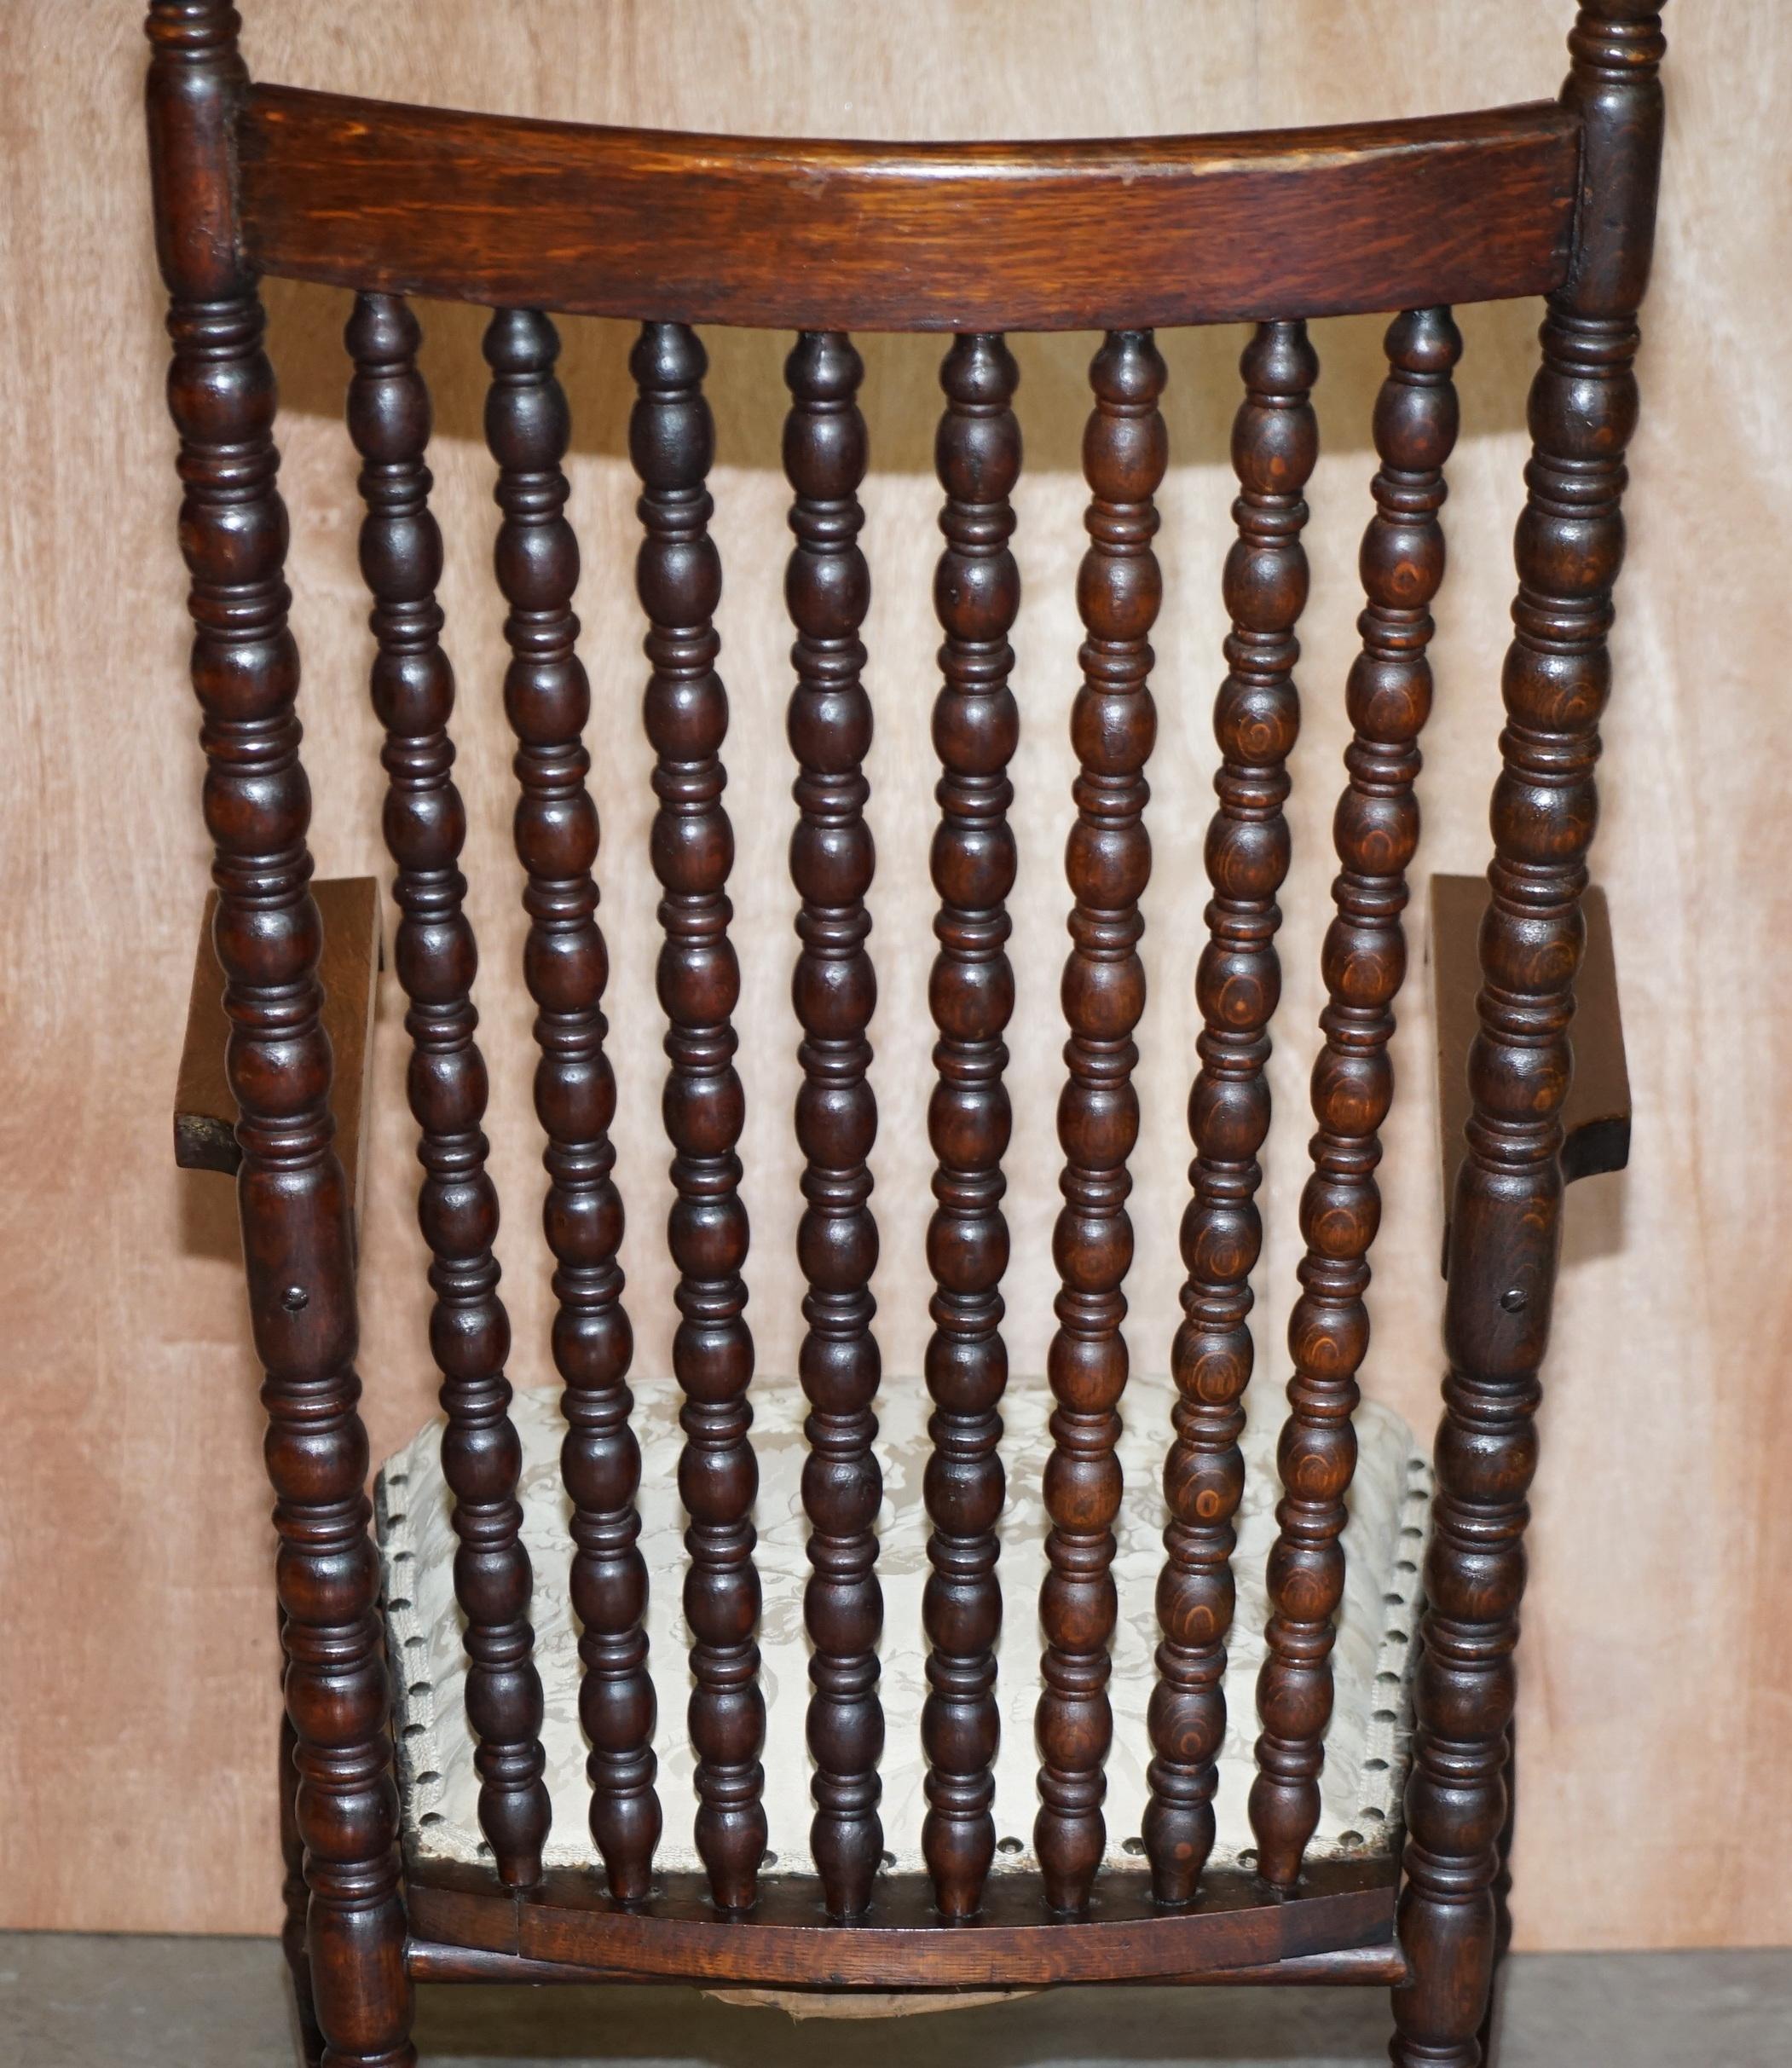 Victorian Oak Rocking Chair with Scottish Bobbin Turnings All over Cherub Fabric For Sale 9